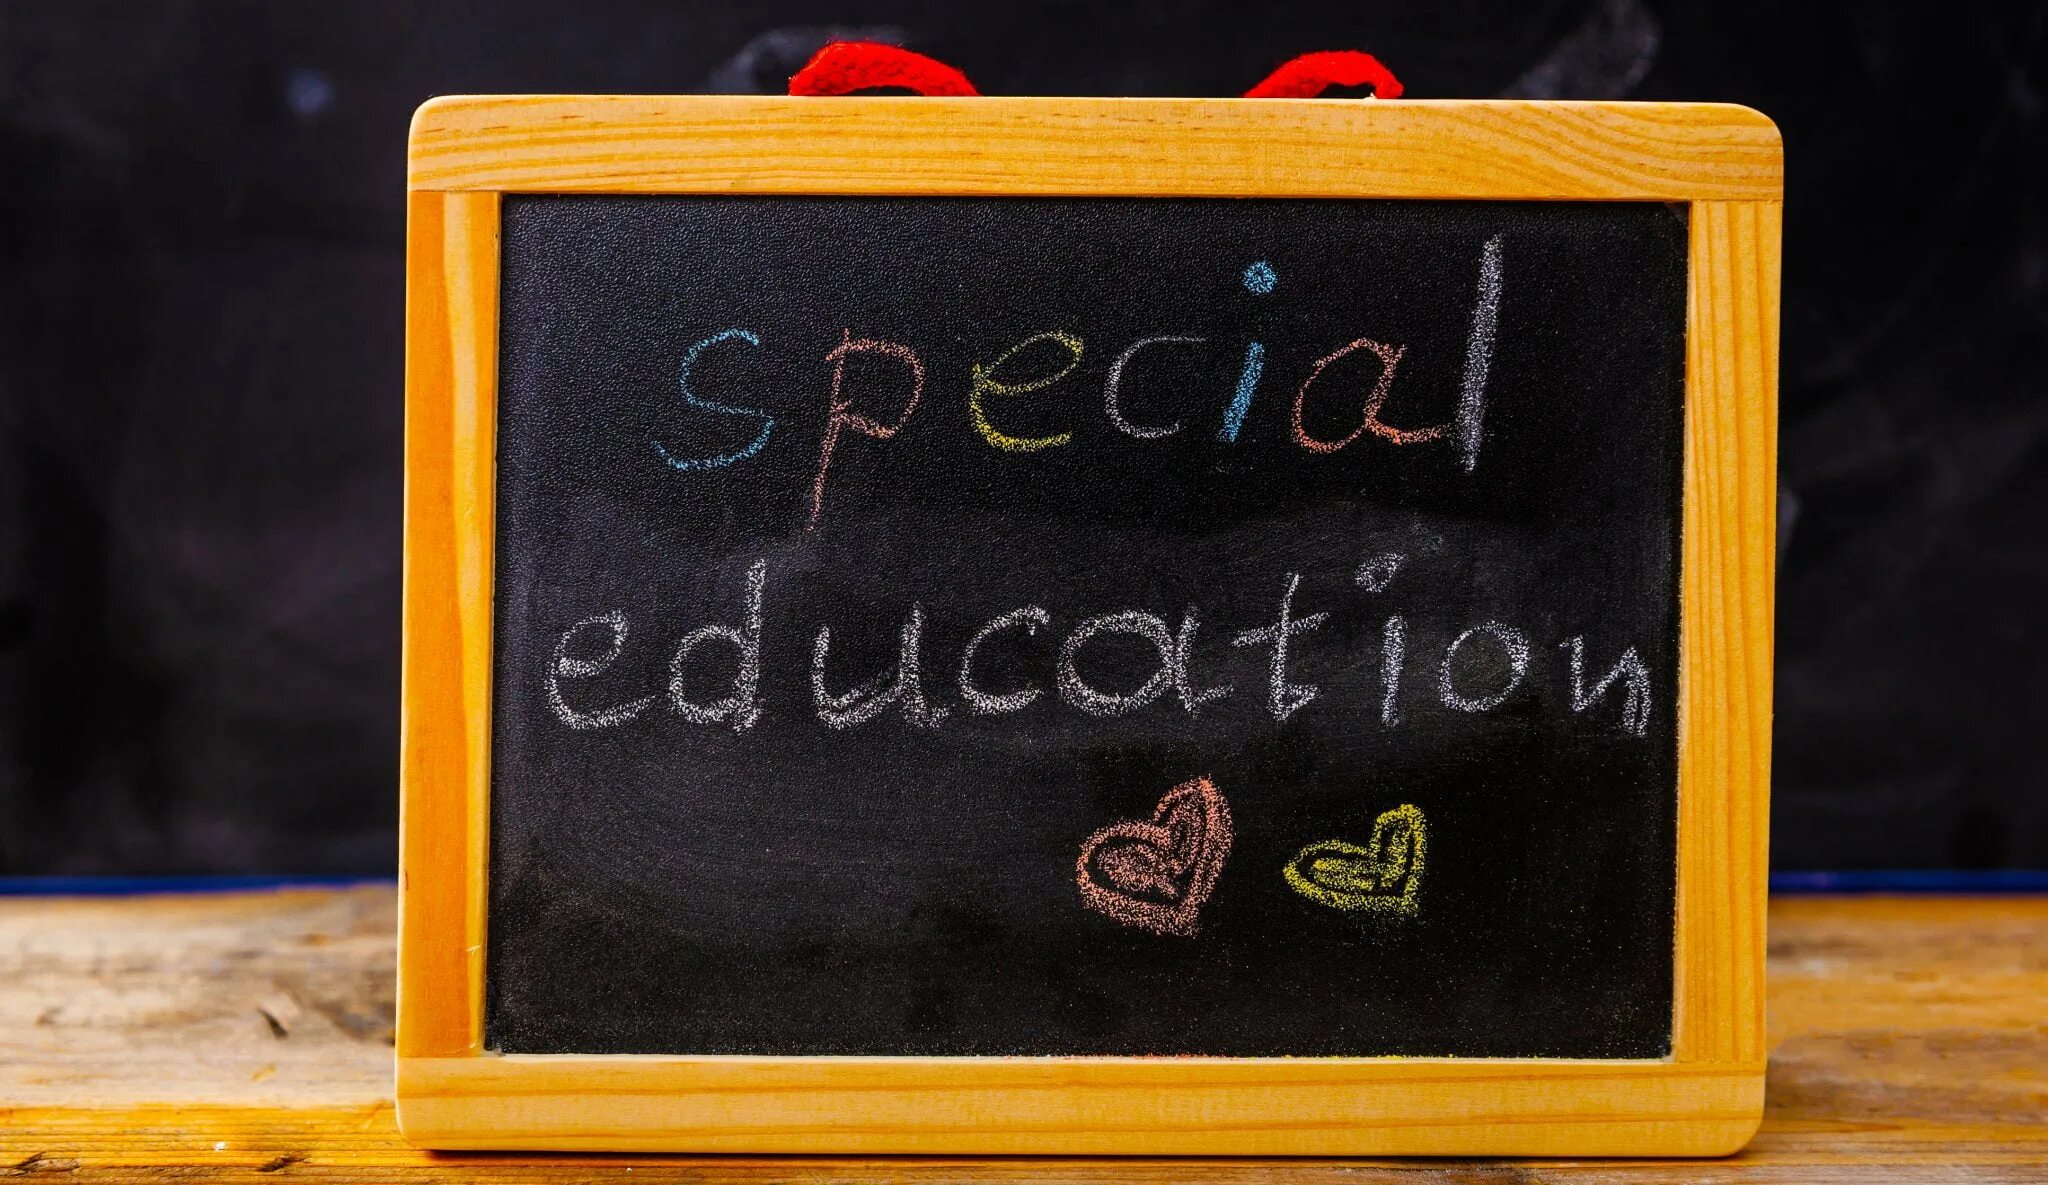 Made by student. Рамка мелом на доске. Рамка Школьная доска. Primary Education blackboard. Education text.